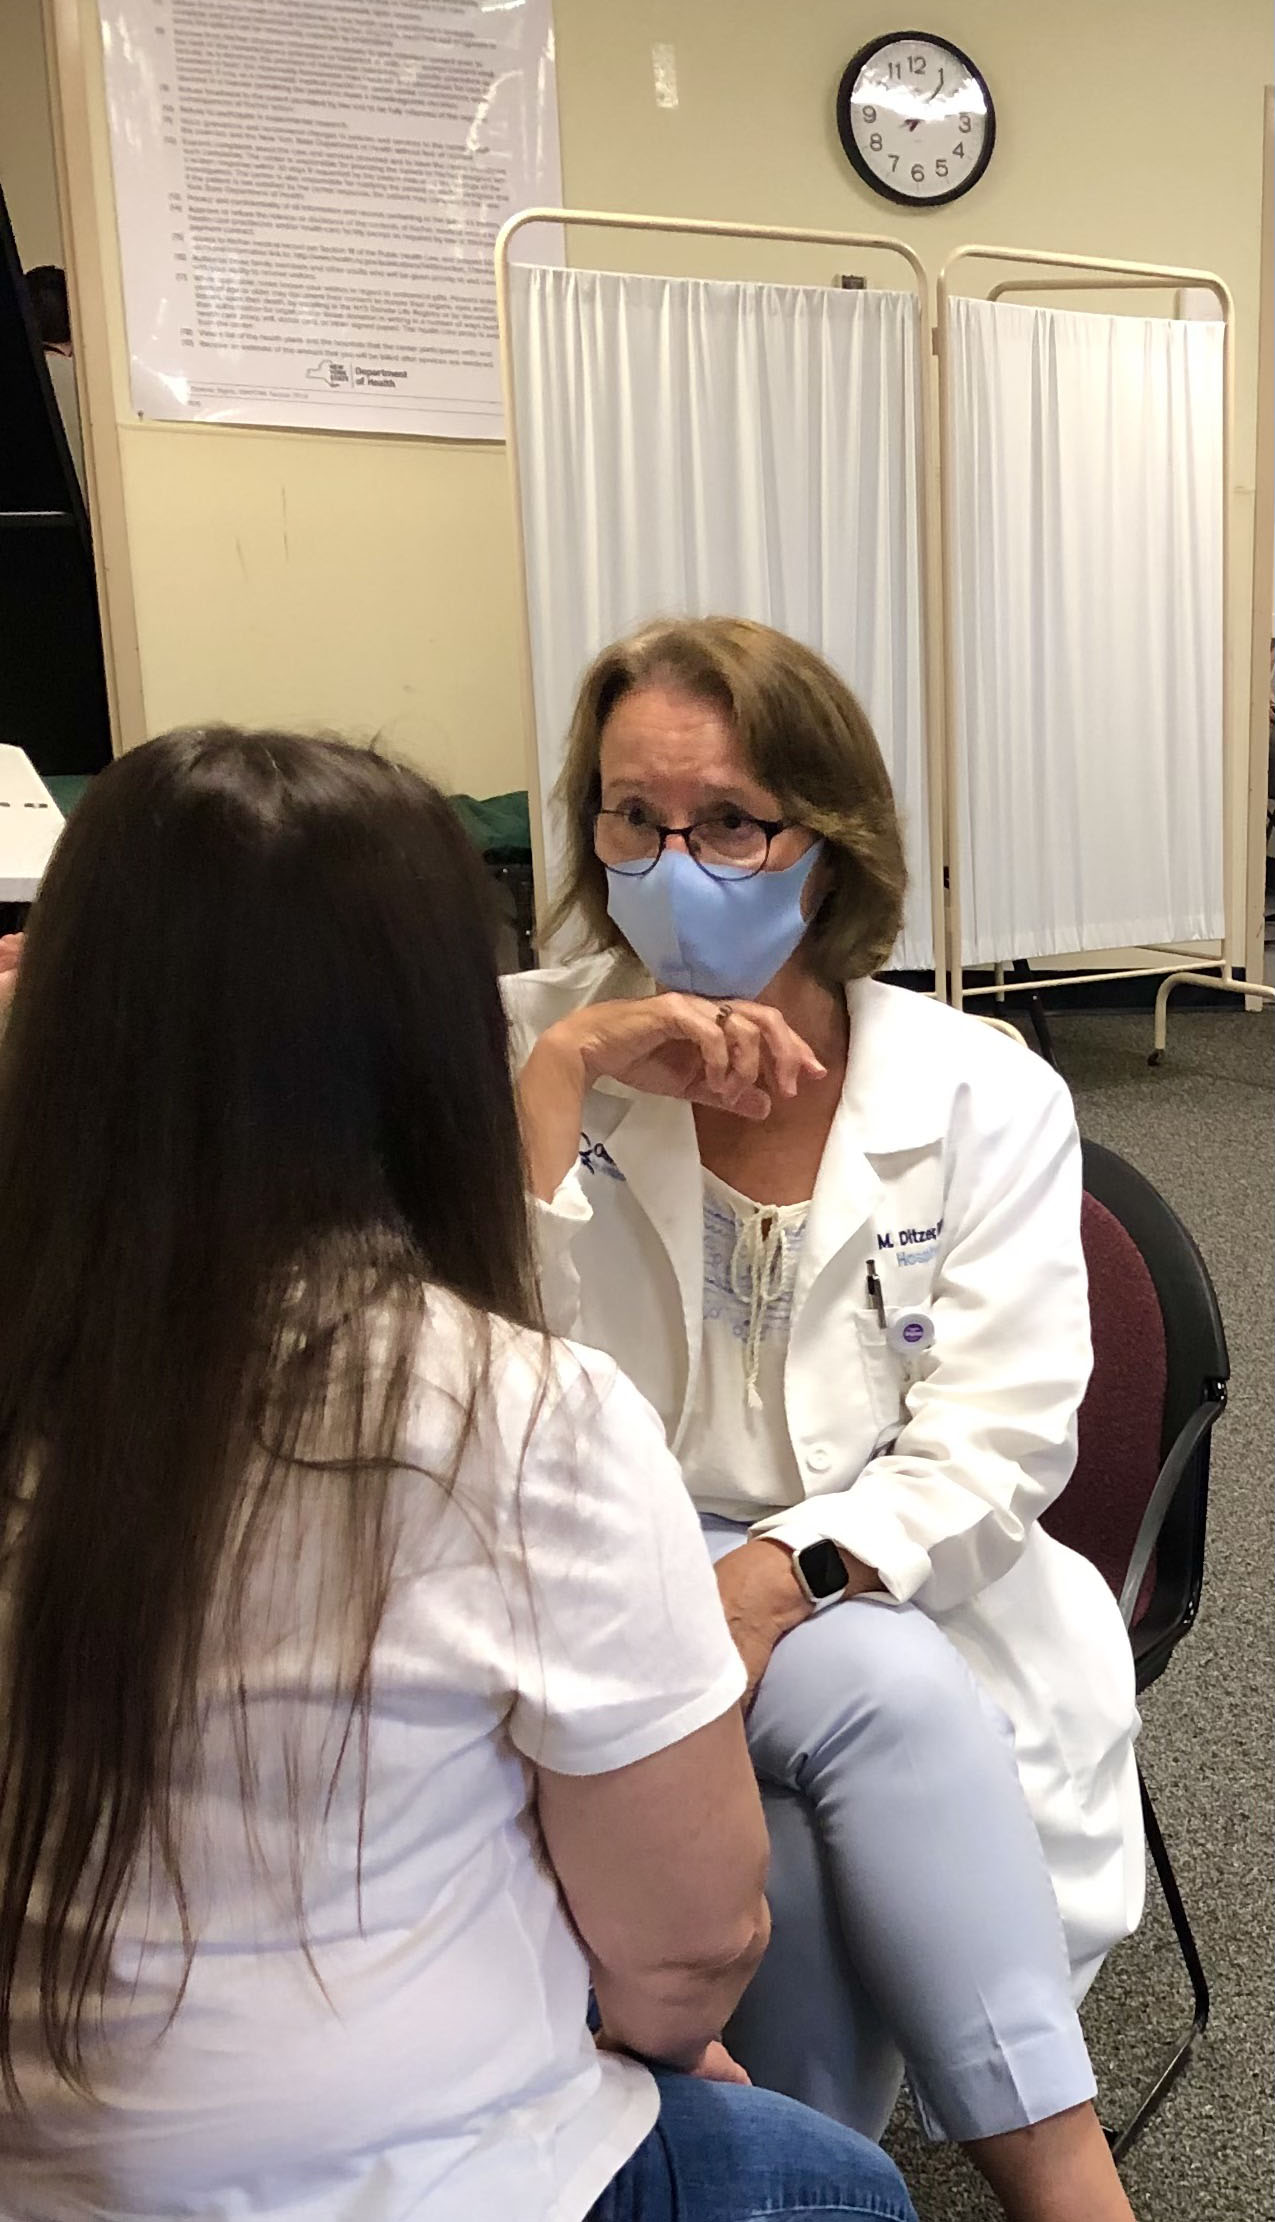 Retired Physician’s Assistant Mary Ditzer is this week’s honoree. She is pictured here talking to a patient at a COVID-19 vaccination clinic at the Oswego County Health Department clinic in Oswego.